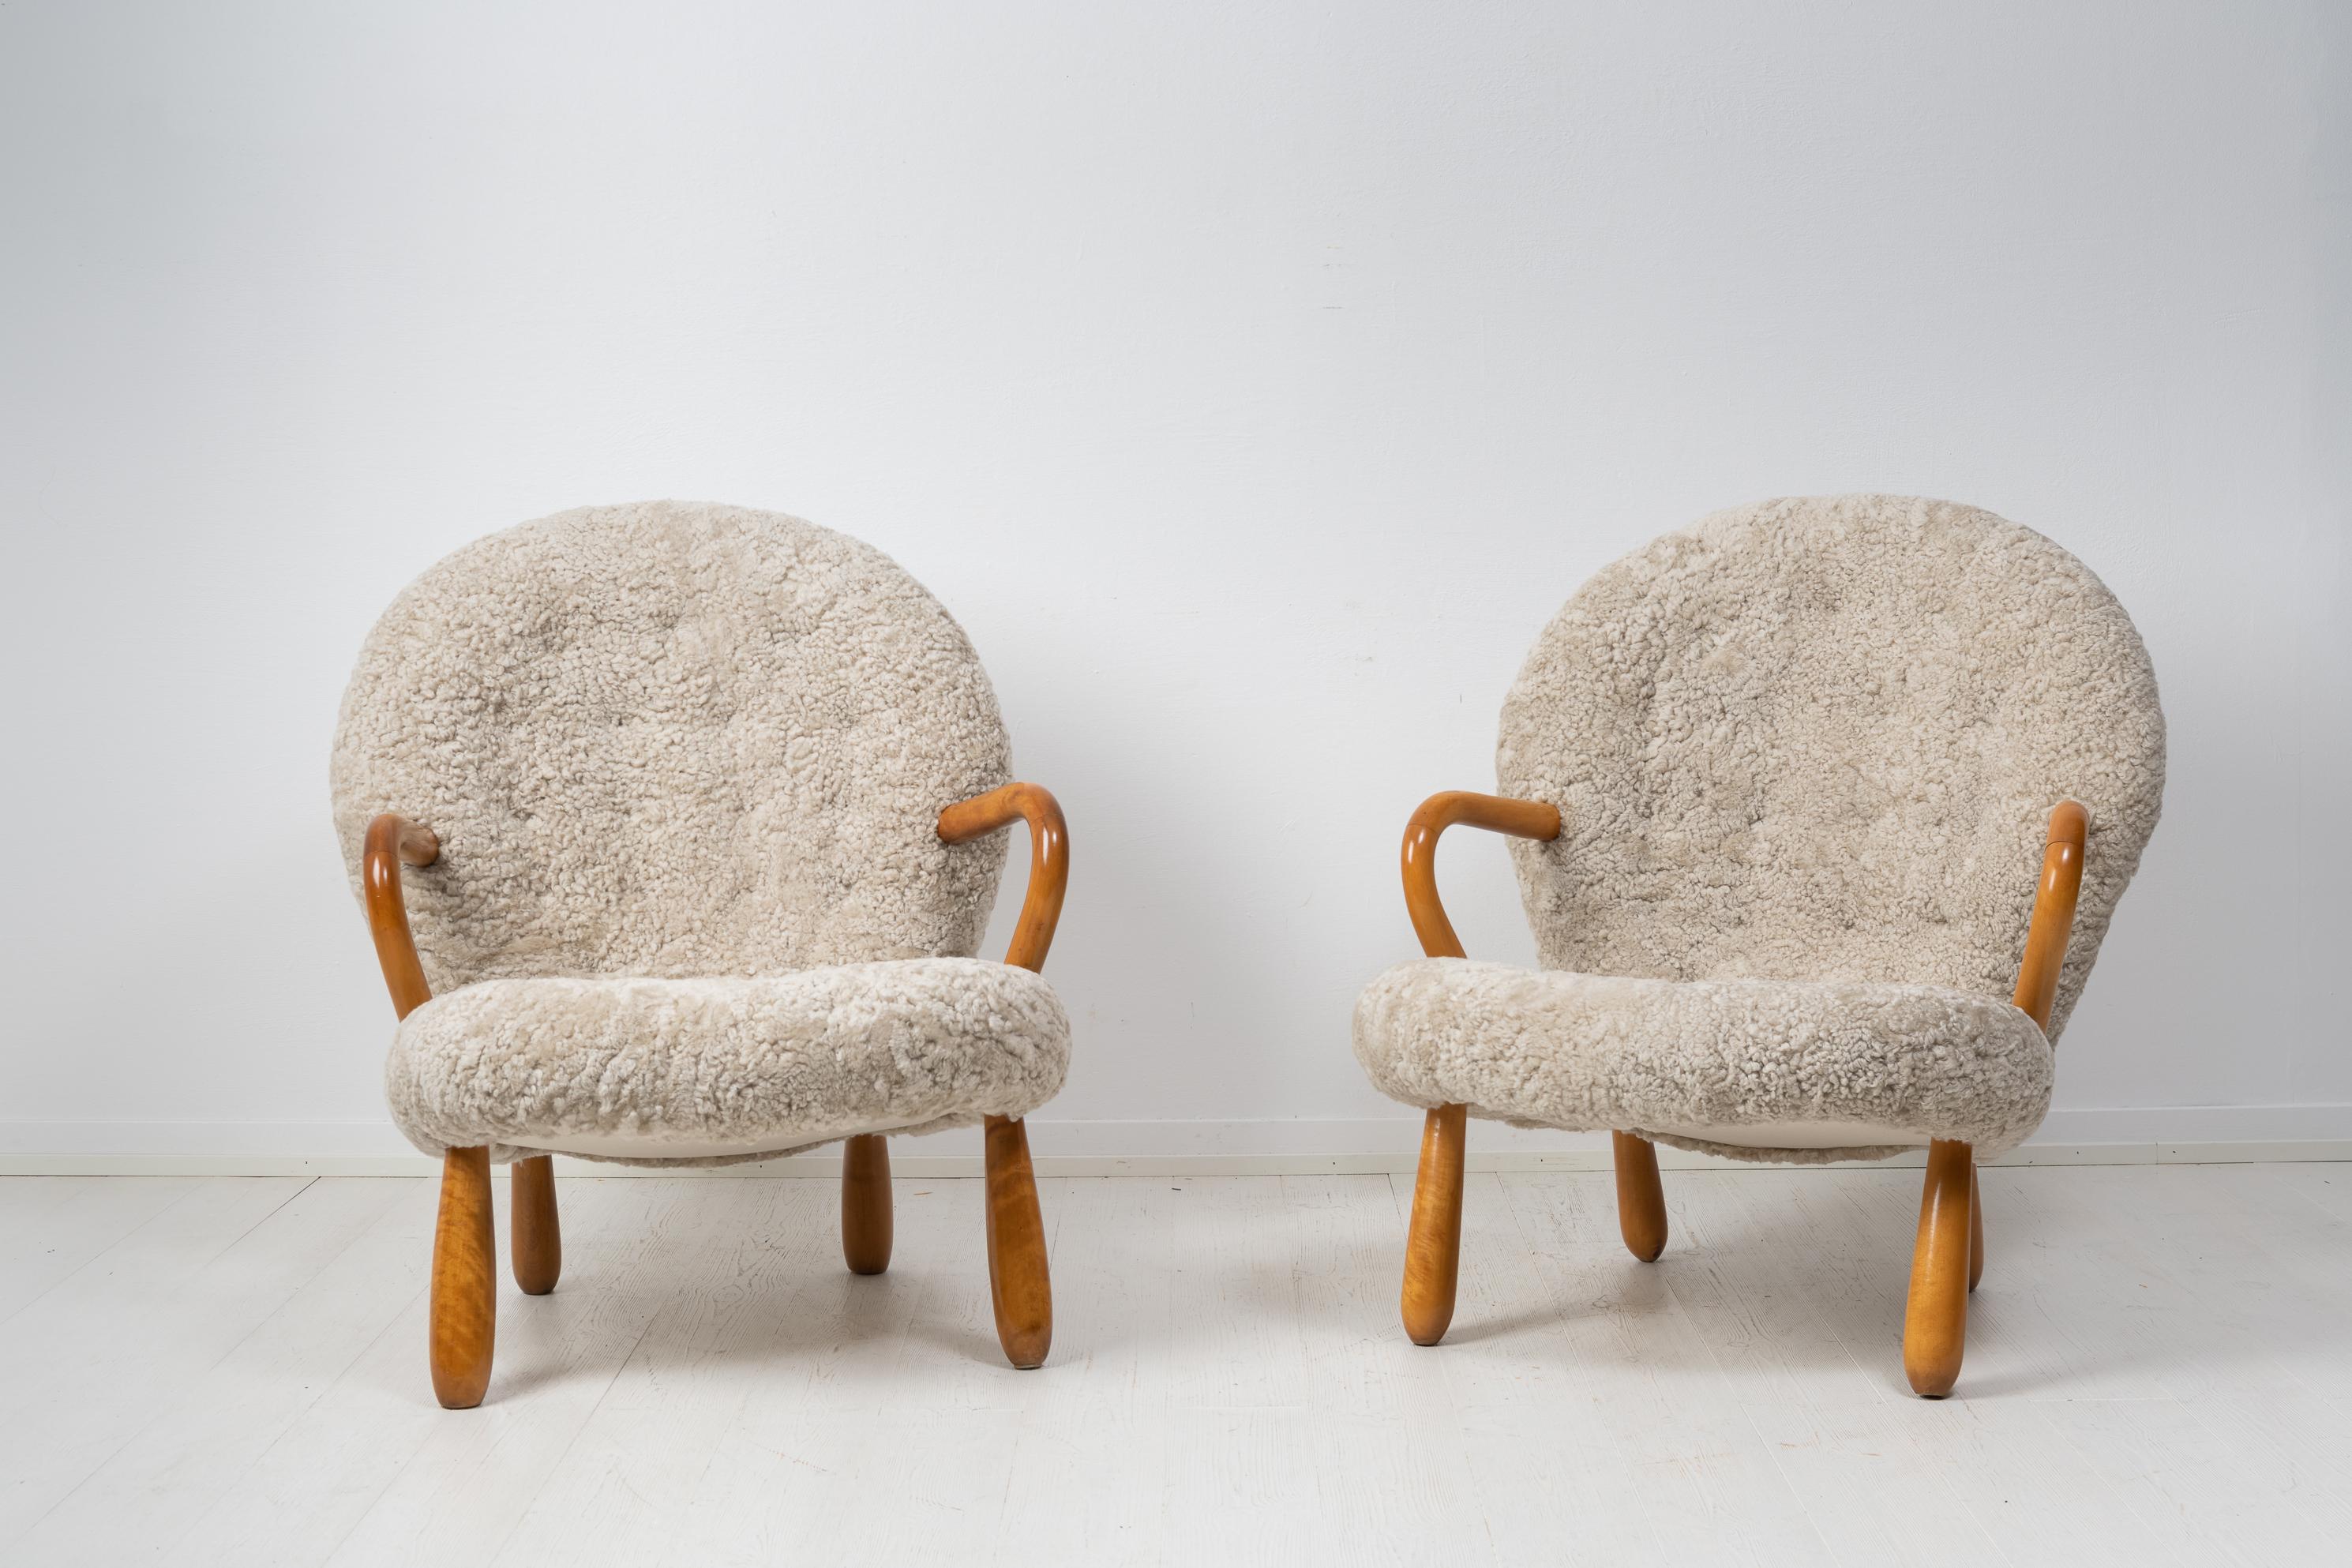 Scandinavian modern clam chairs, or Muslingestolar are they are also known designed by Arnold Madsen. The chairs are authentic original chairs from the 1950s and have been renovated inside and out. They have new padding as well as new upholstery in